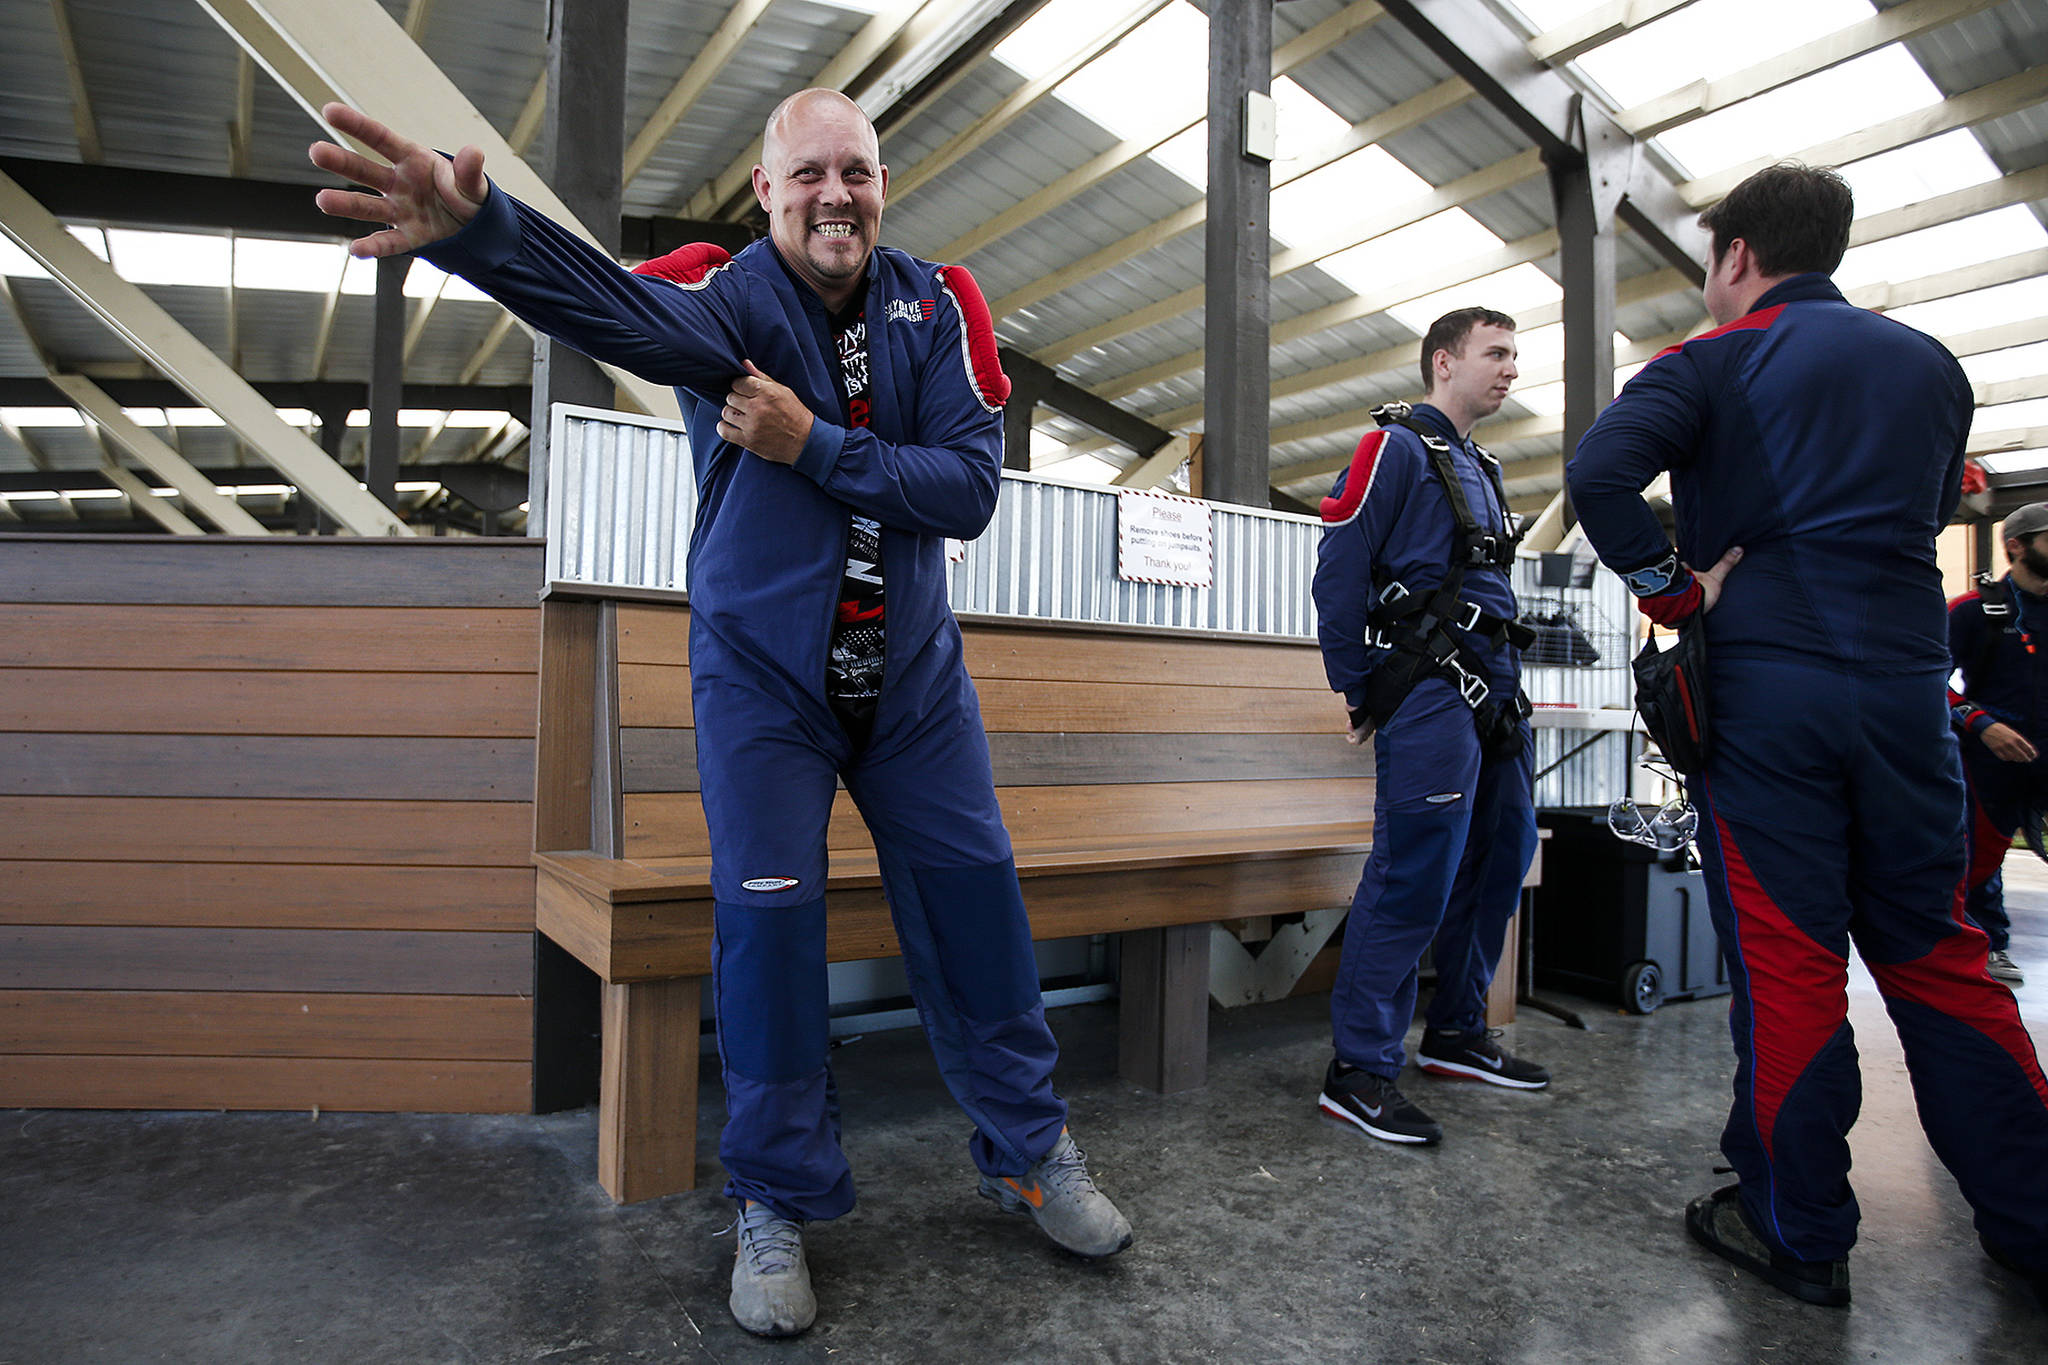 Curtis Zinn (left) suits up before skydiving at Skydive Snohomish’s Fill the Sky with Hope event on Saturday, July 1. Zinn, and others who receive assistance from Housing Hope, took to the skies on Saturday to overcome fear and celebrate their sobriety. (Ian Terry / The Herald)